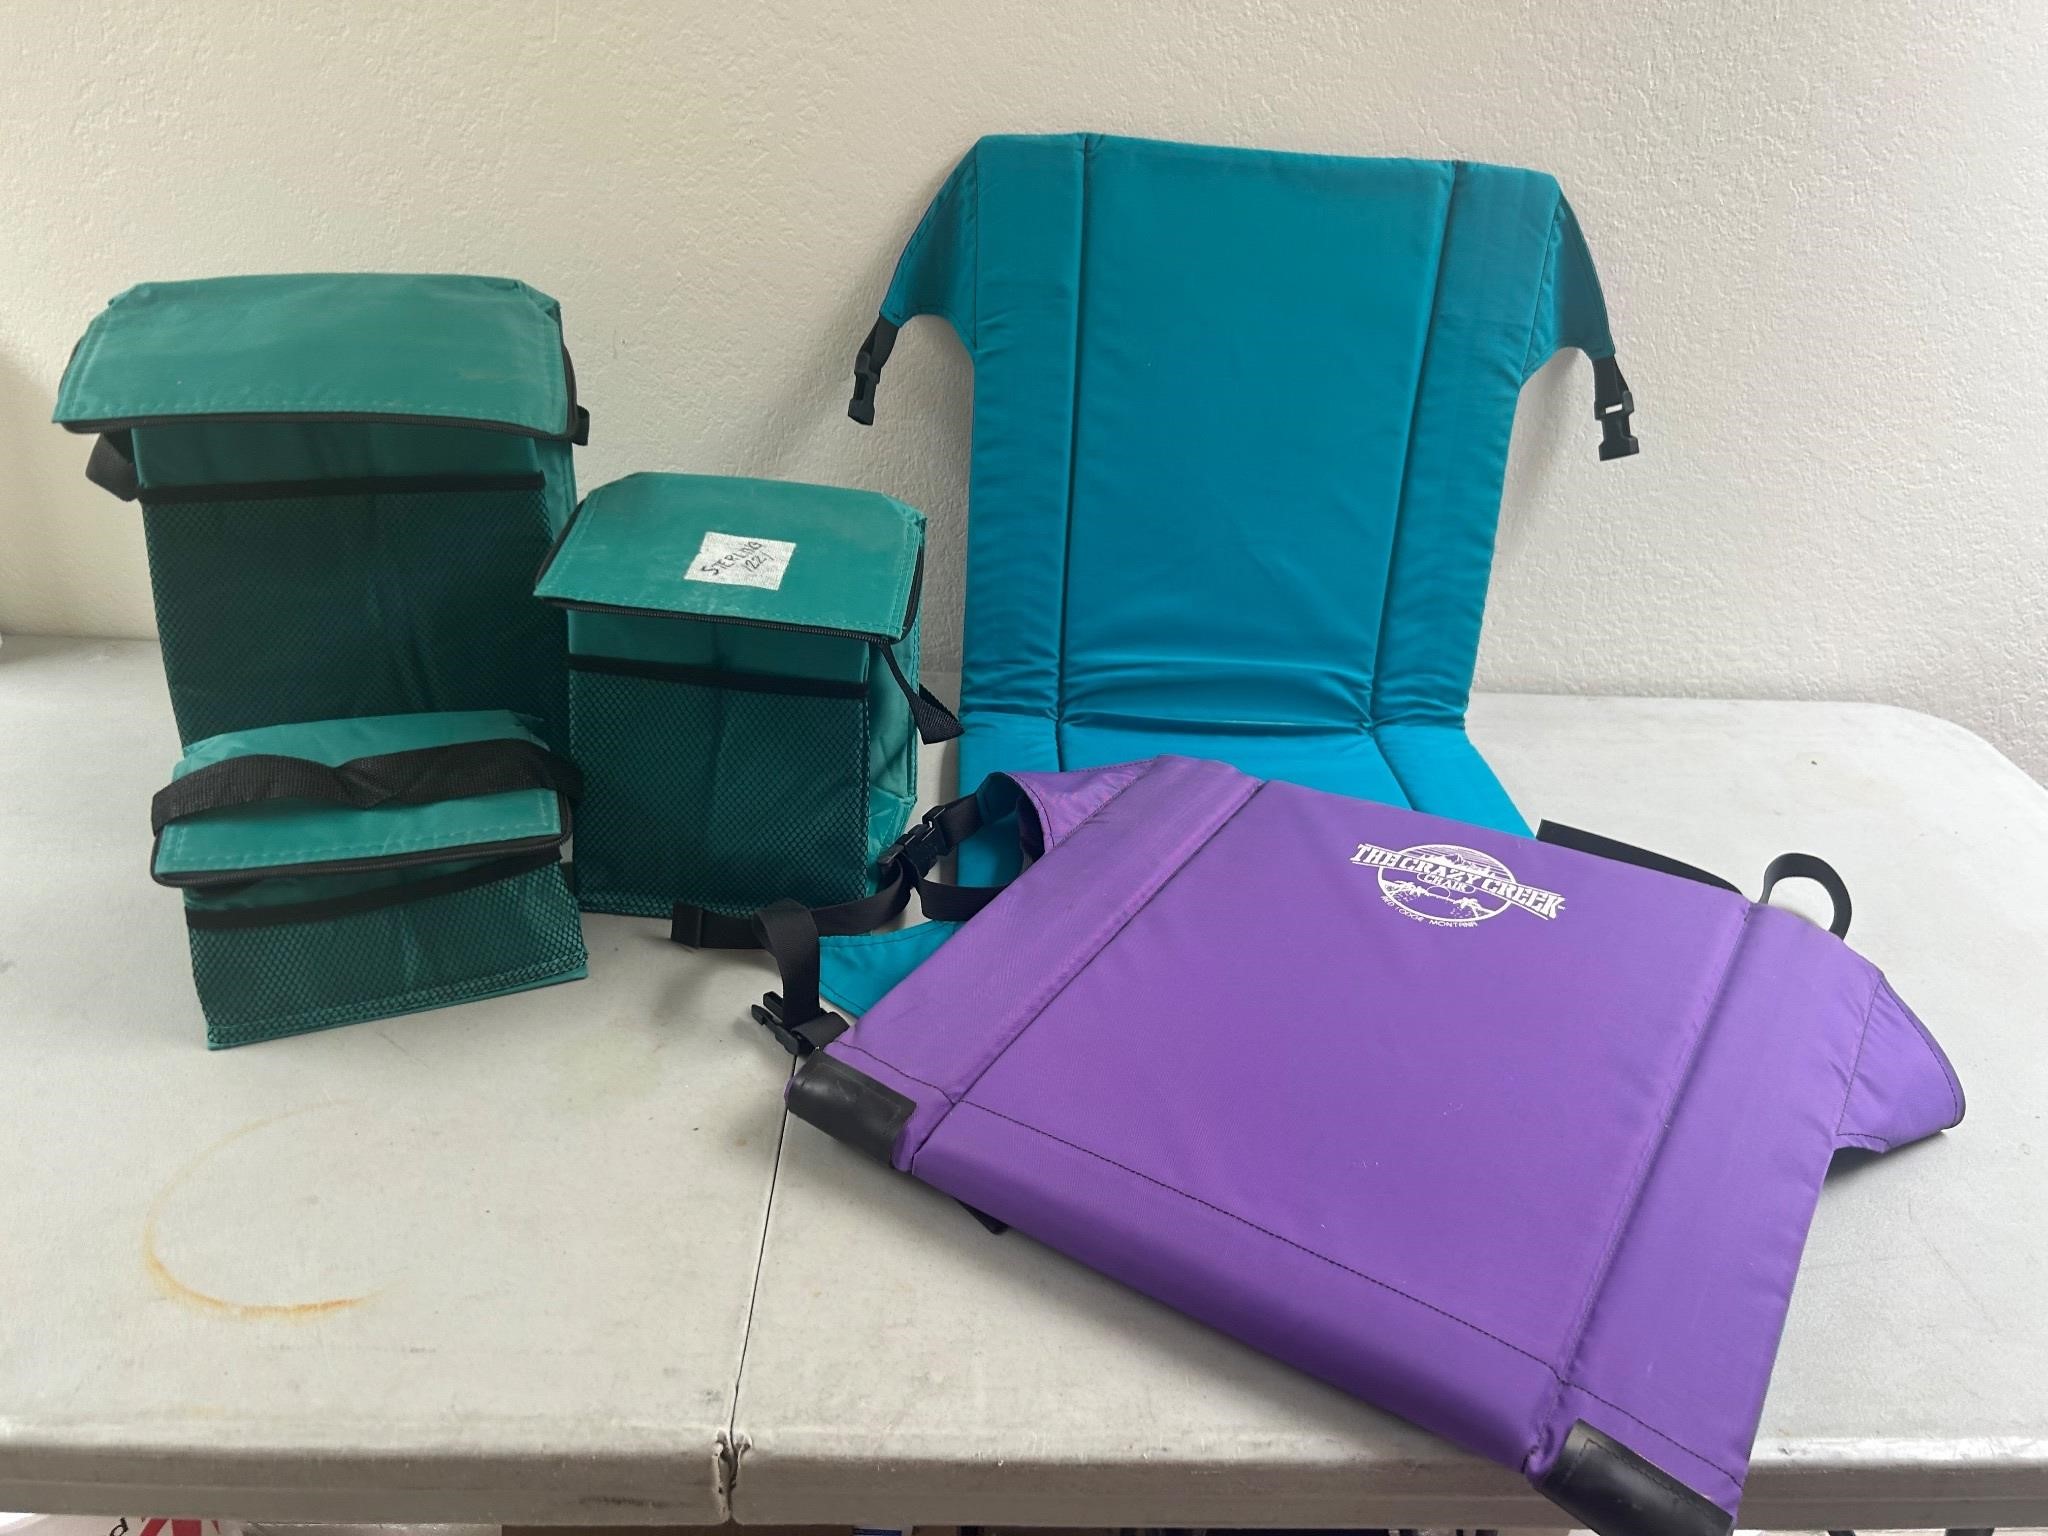 2 Crazy Creek Chairs & Insulated Cases